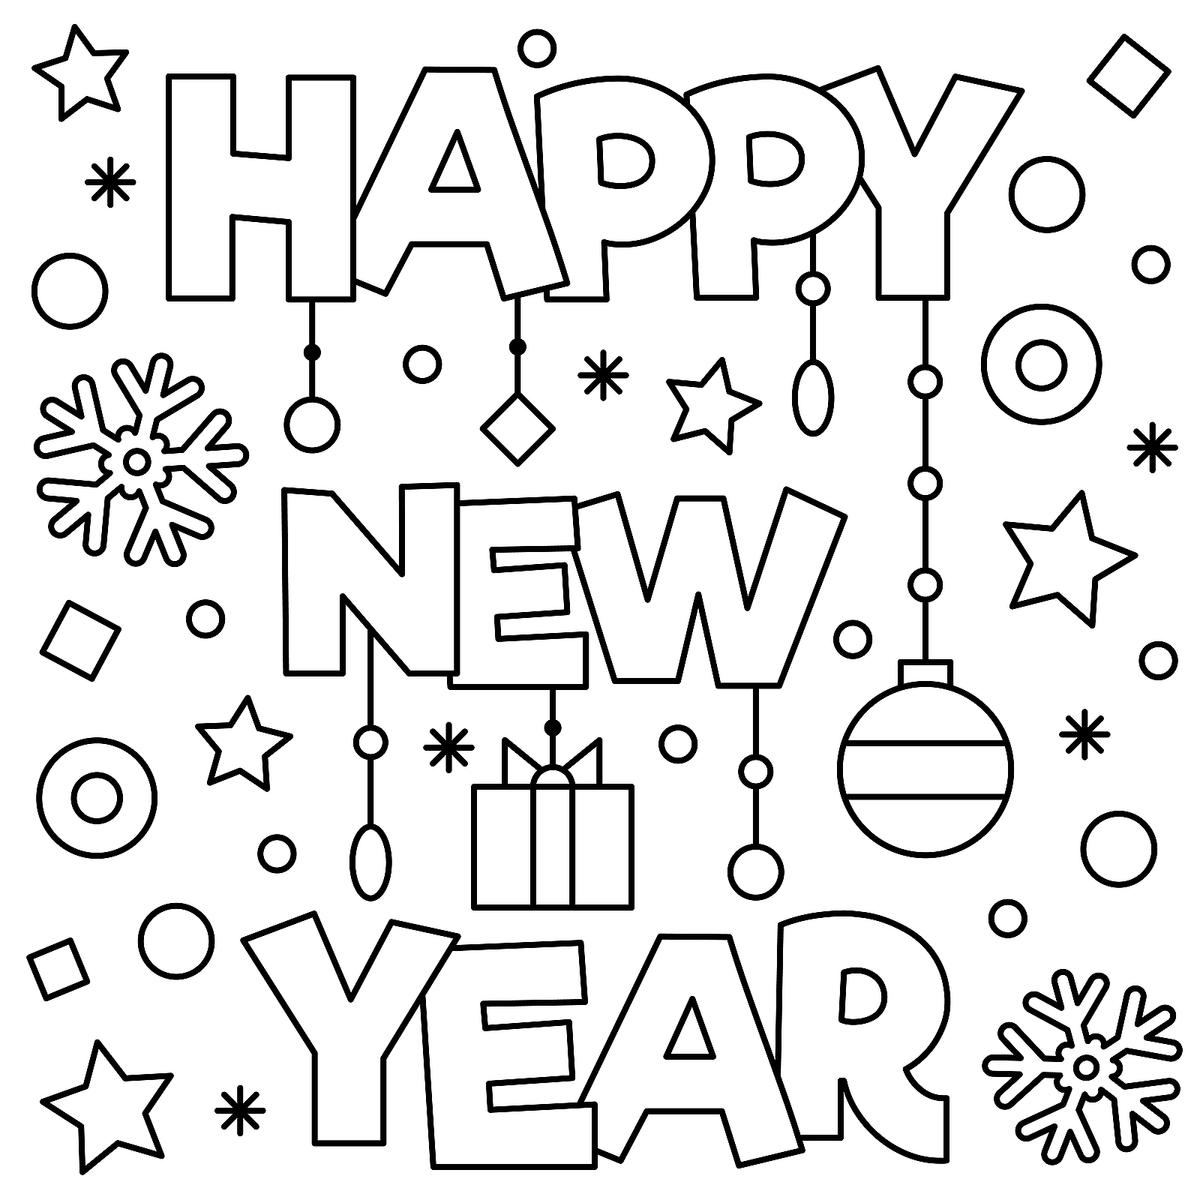 Happy new year free coloring pages for kids to wele the new year printables mom